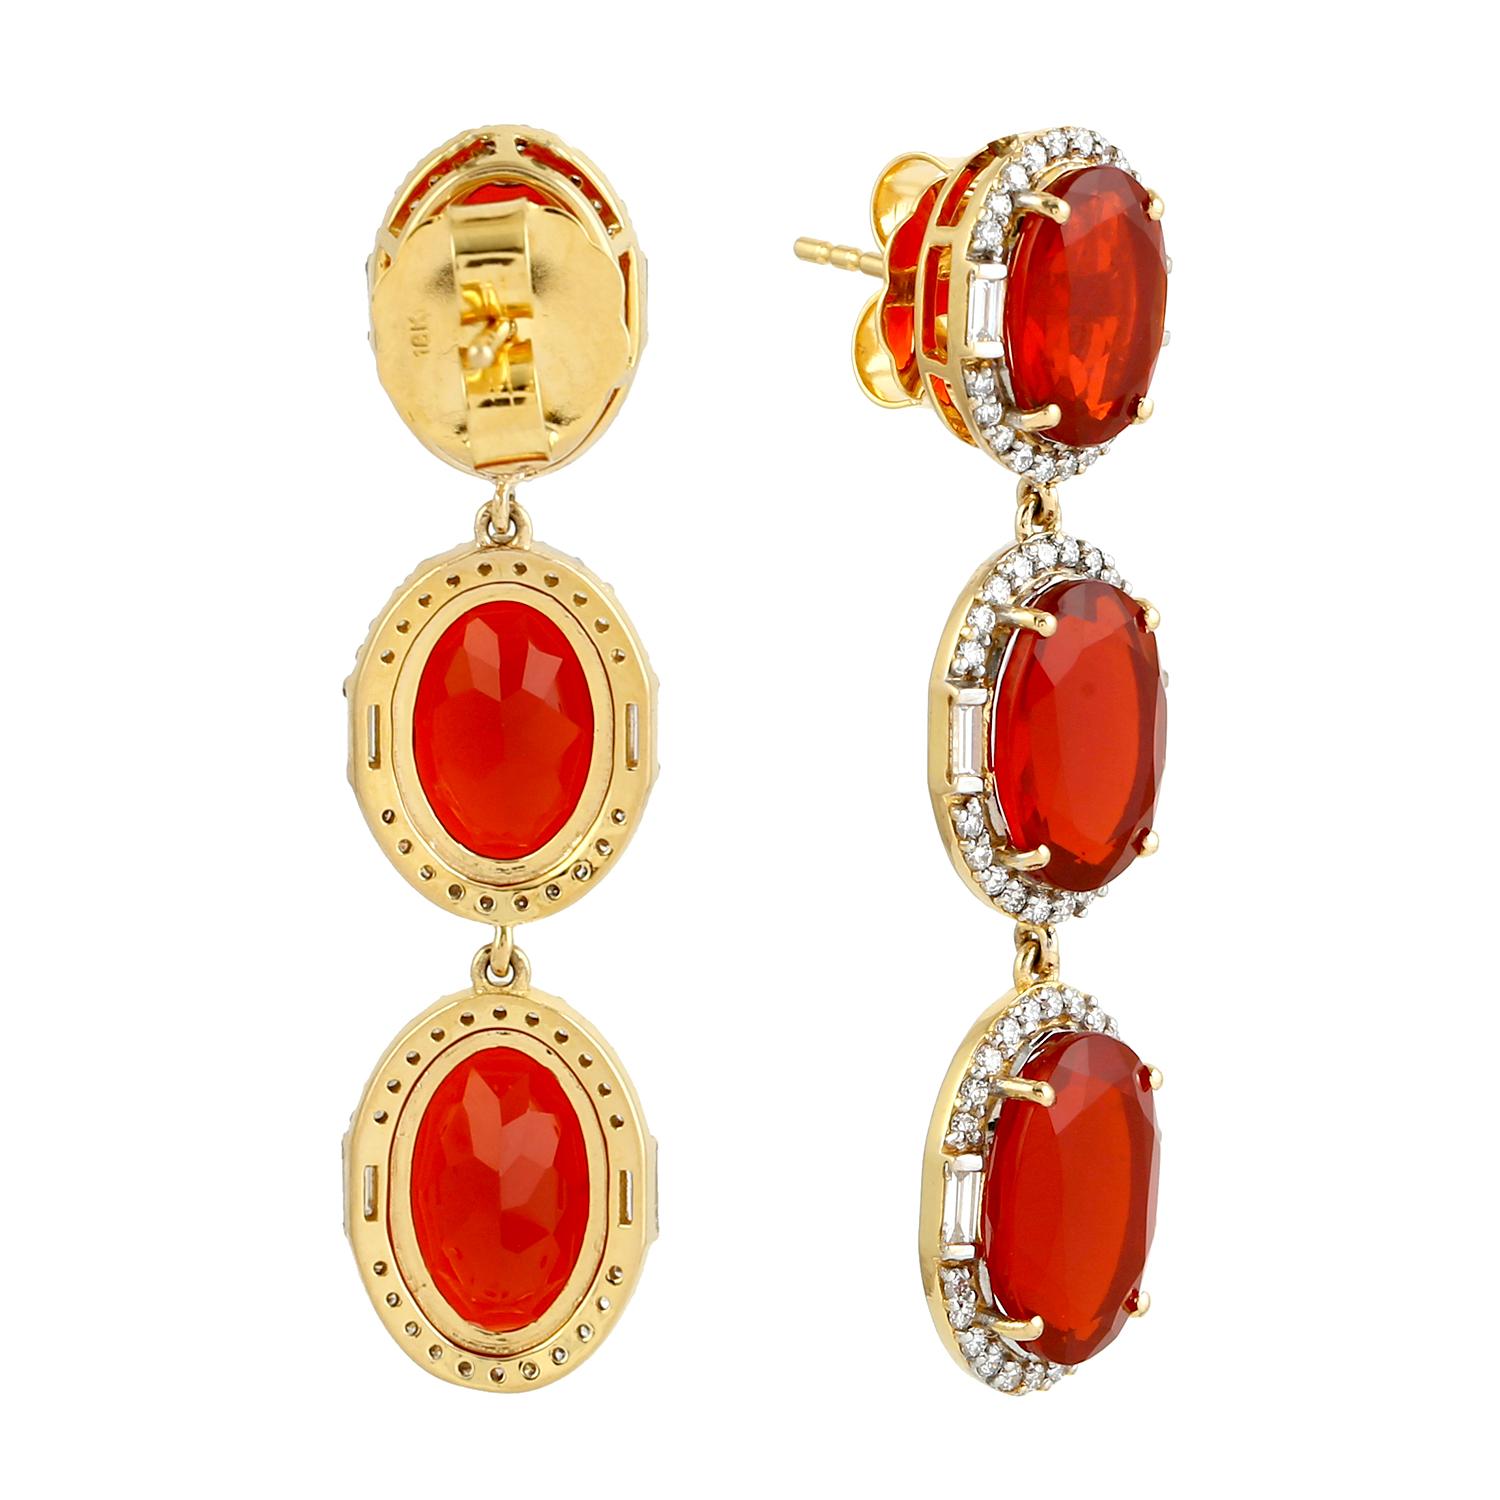 Contemporary Three Tier Fire Opal Earrings With Pave Diamonds In 18k yellow Gold For Sale